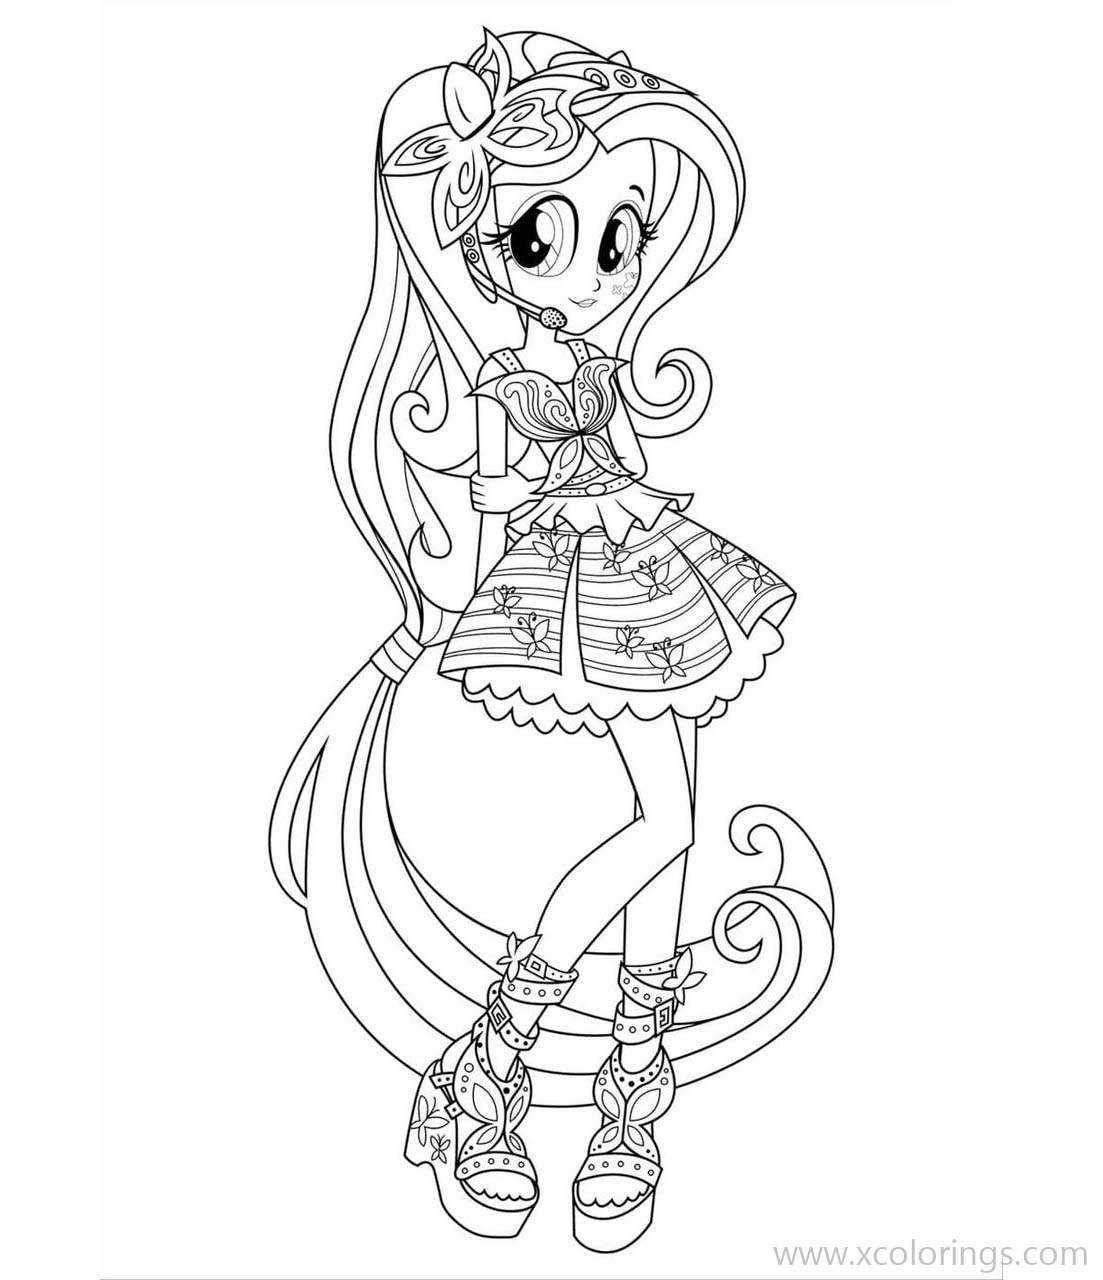 Free Equestria Girls Coloring Pages Fluttershy is So Lovely printable